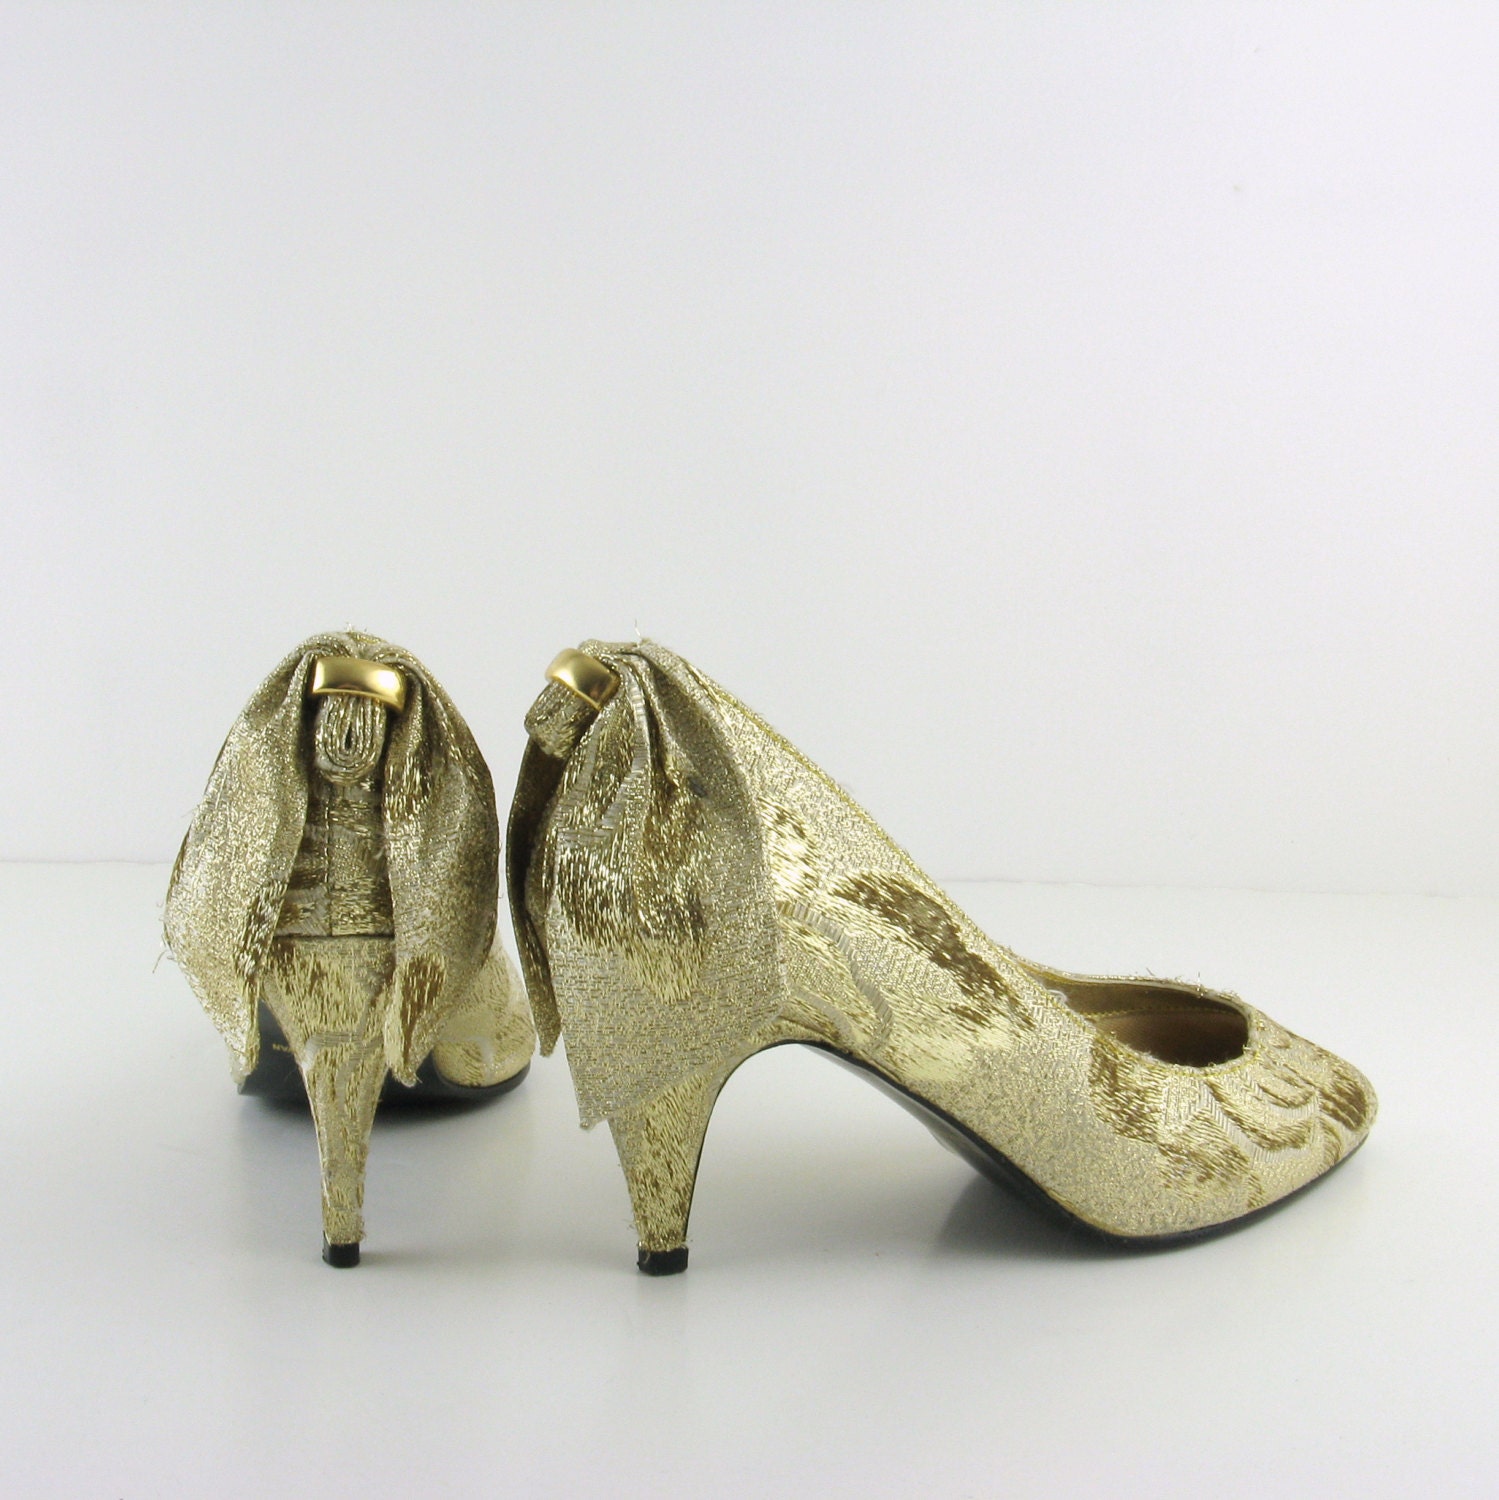 Vintage Gold Bow High Heels - 1980s Shoes Size 7 by After Midnight - TwoMoxie